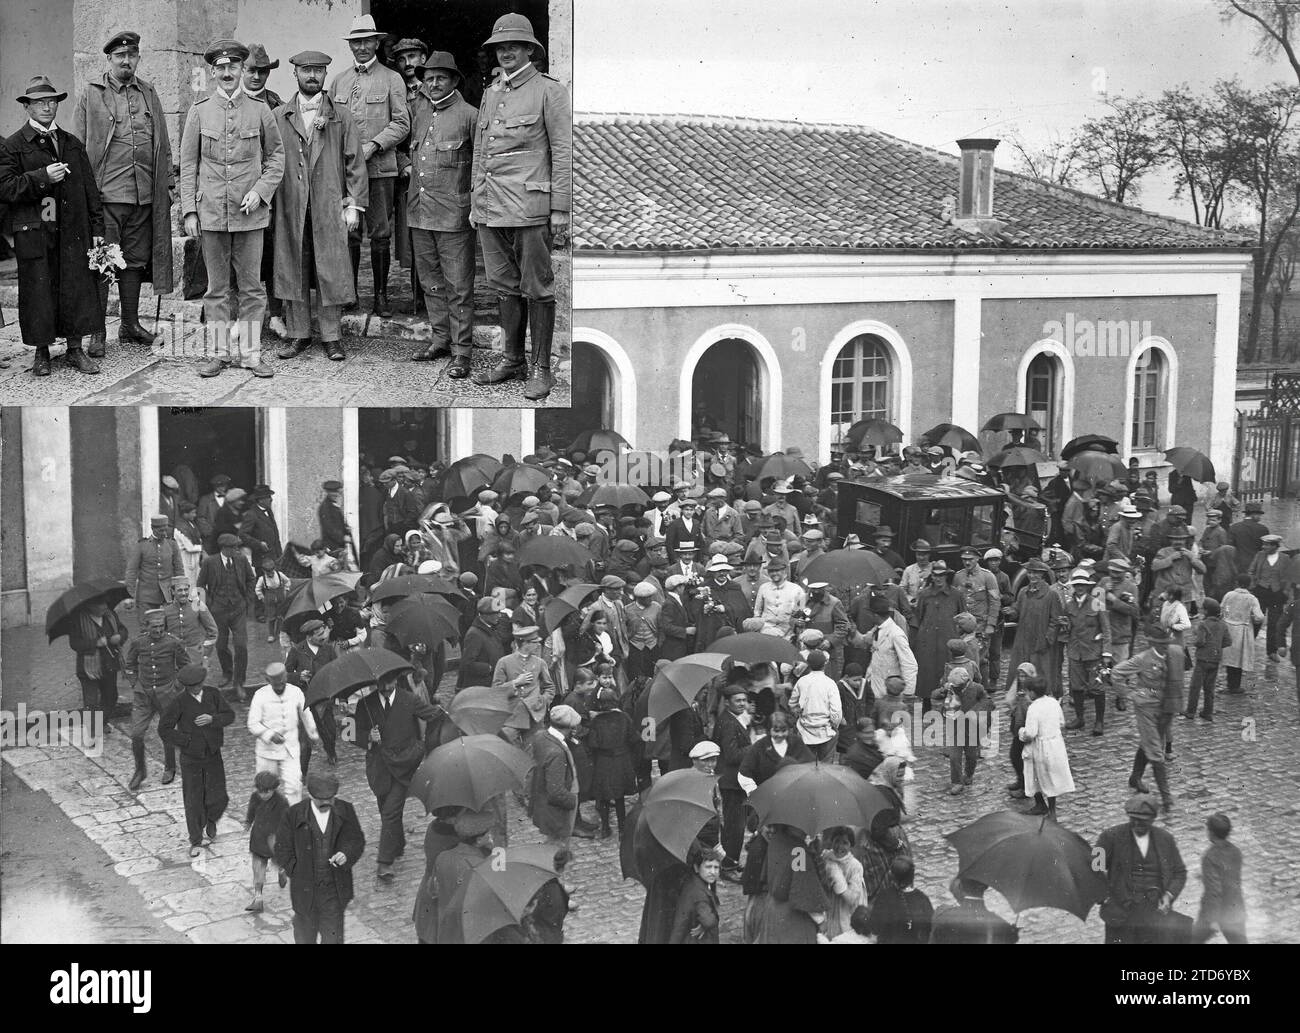 04/30/1916. In Alcalá de Henares. Appearance of the station square at the arrival of the train that led to the Germans. In the upper left corner, a group of expedition officers. Credit: Album / Archivo ABC / José Zegri Stock Photo